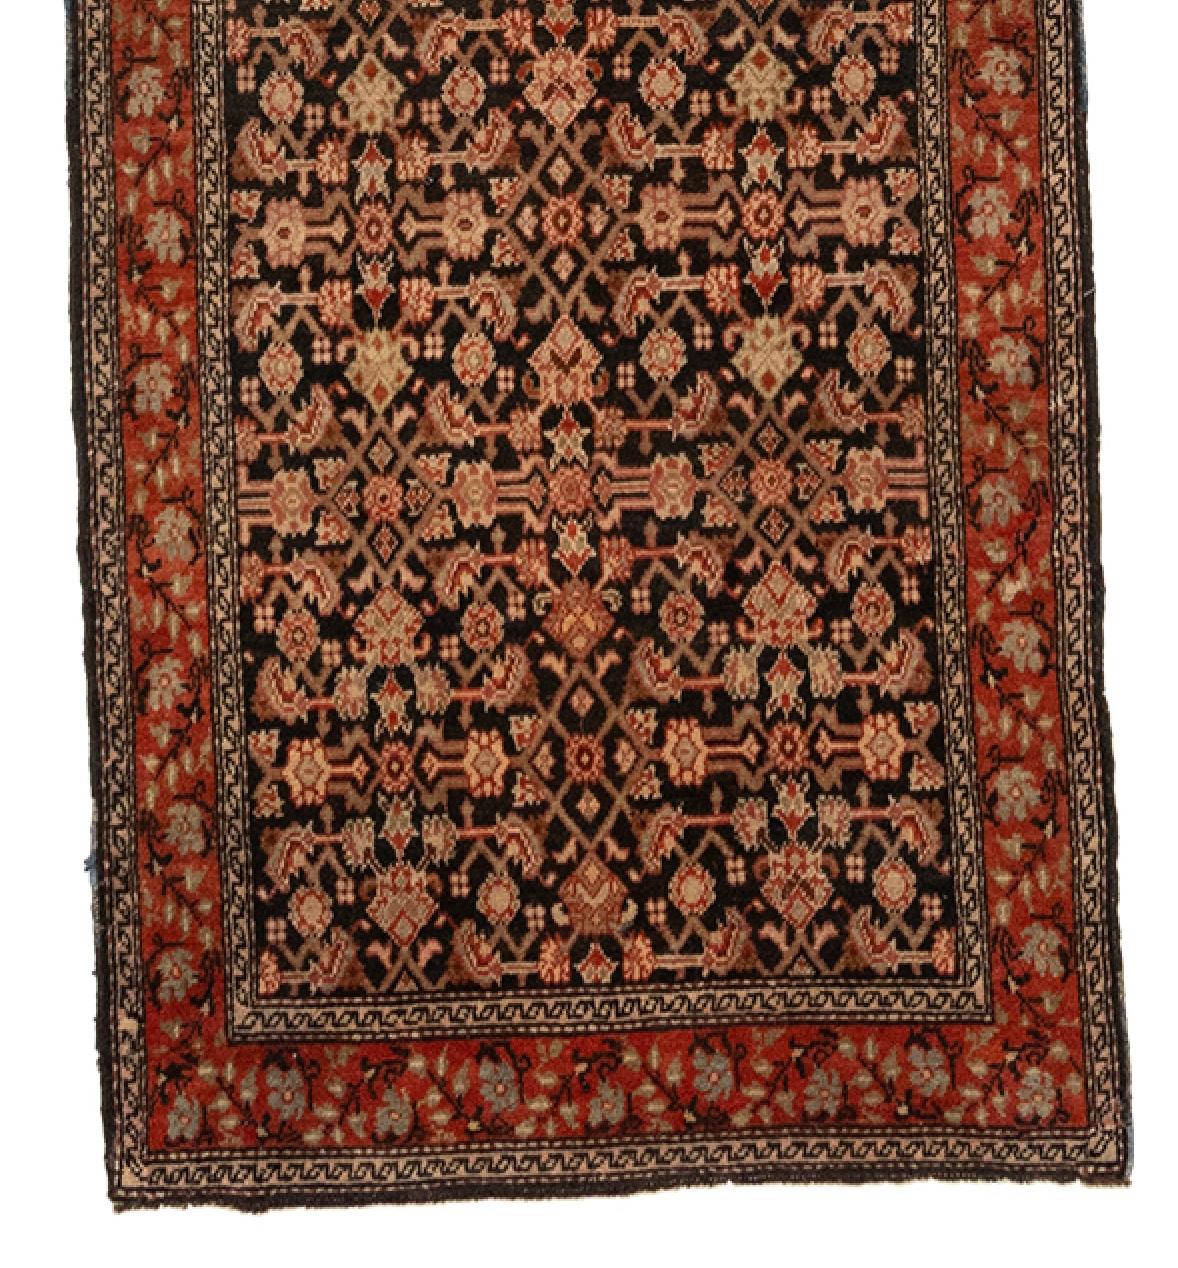 Sanandaj rugs are a type of handwoven rug that originates from the city of Sanandaj, in the Kurdistan. Sanandaj rugs are highly prized for their quality craftsmanship, unique designs, and rich history. These rugs are typically made from high-quality